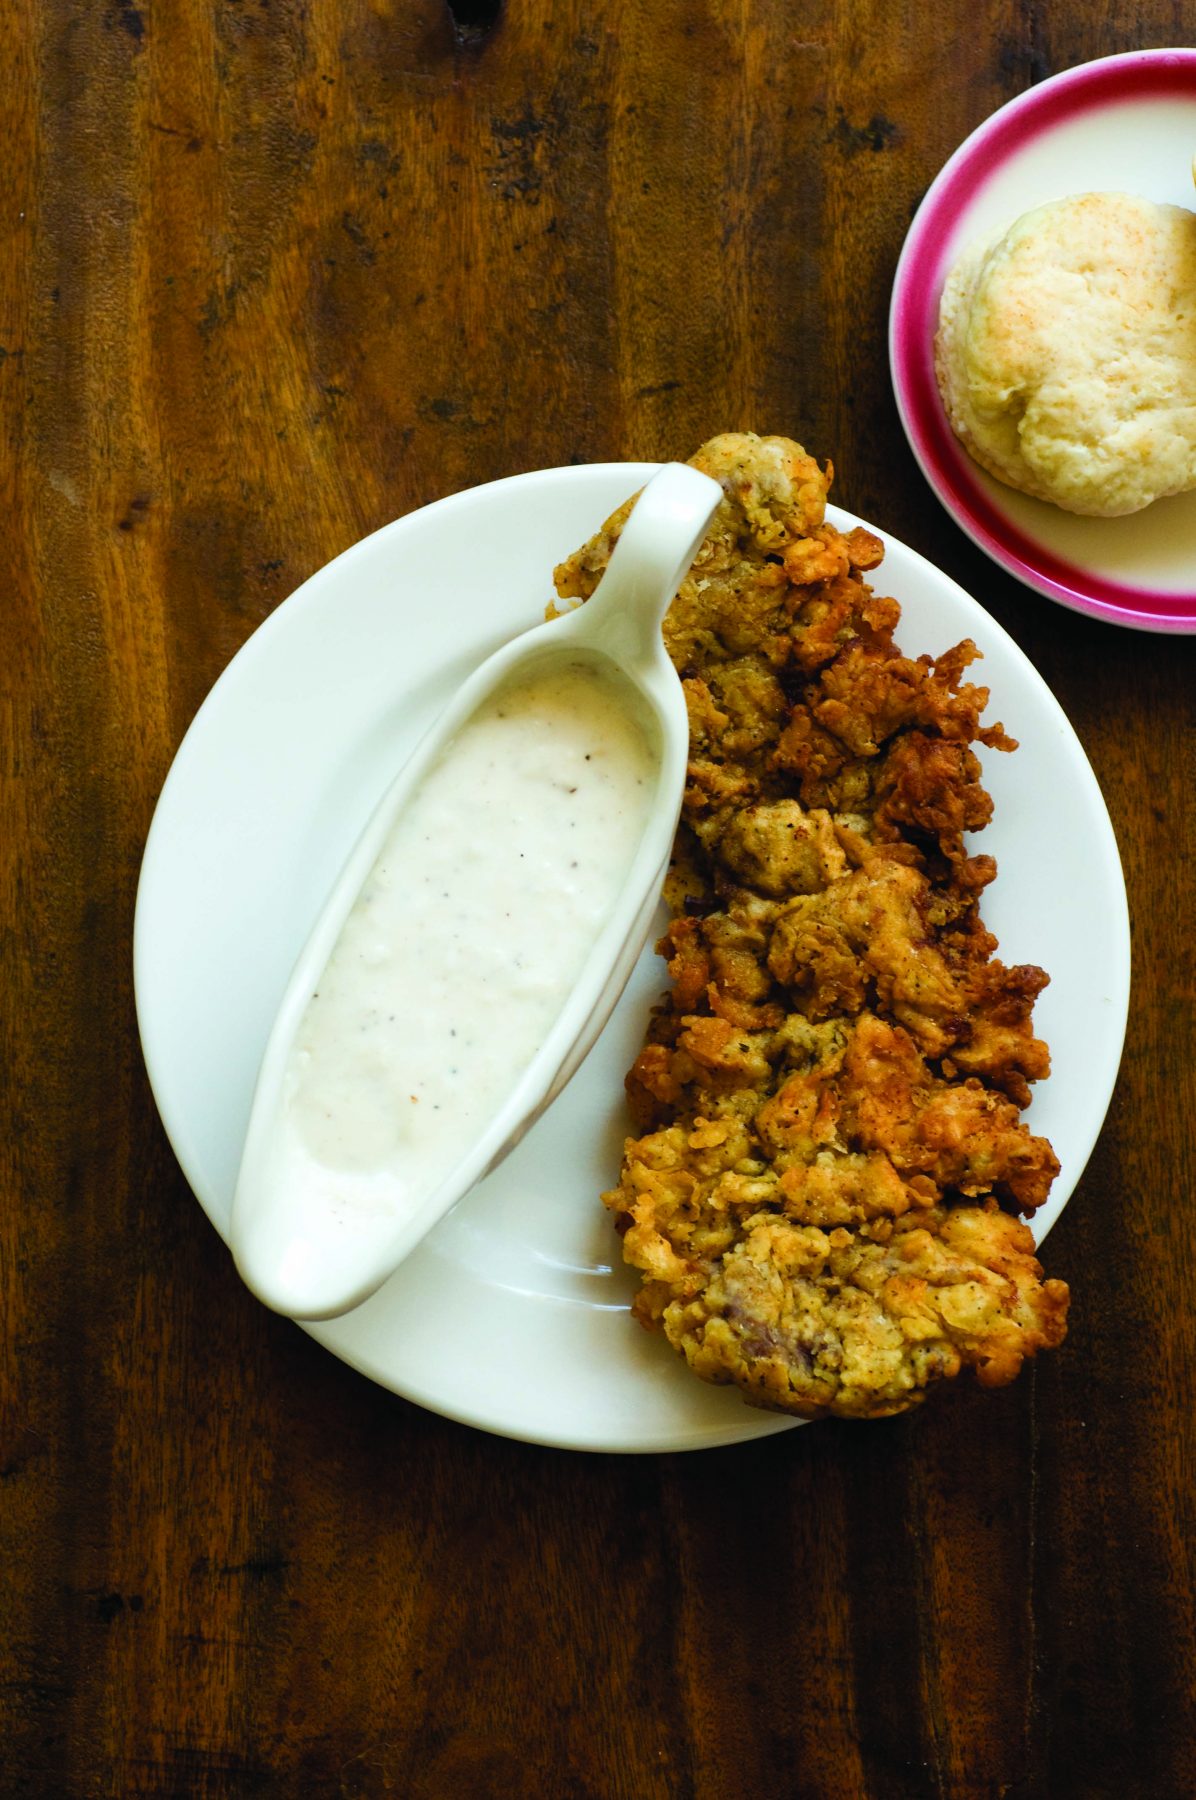 Chicken-fried steak from "The Homesick Texan" cookbook. Photo by Lisa Fain.